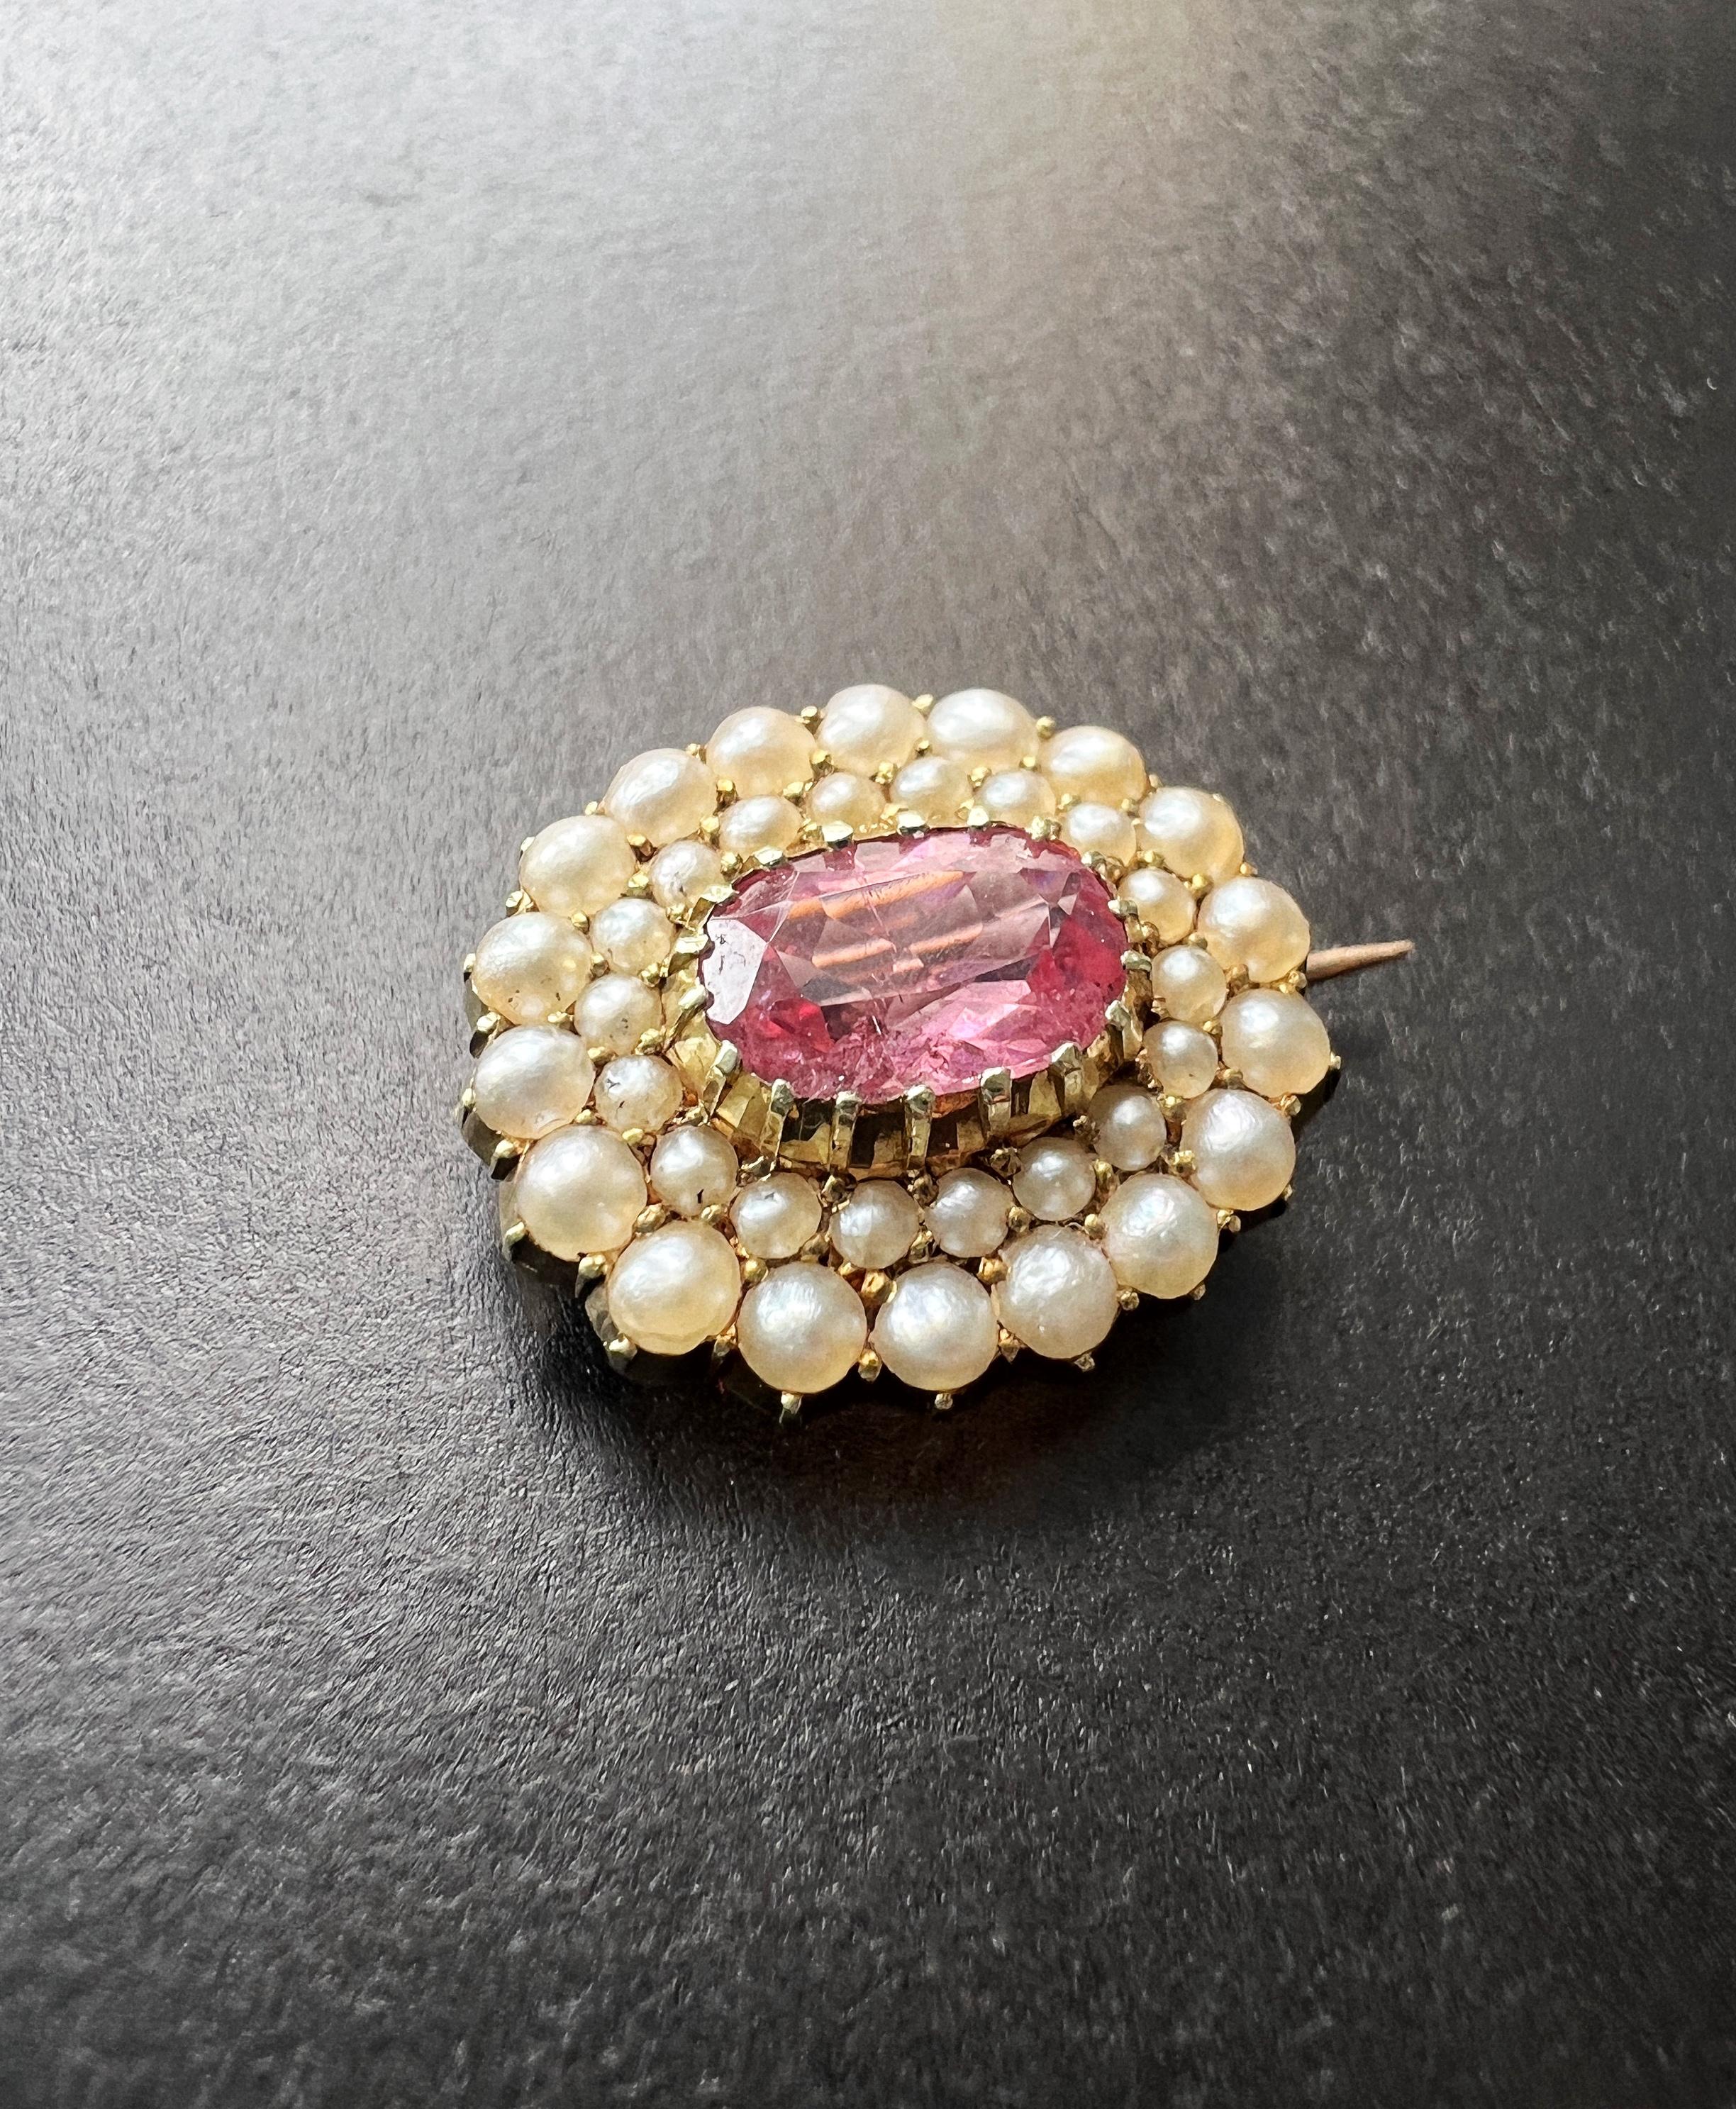 This stunning early 19th century (Early Victorian era) brooch features a vivid pink tourmaline as its centerpiece. The gemstone measures 9mm in length and 6.5mm in width. It is cushion cut, open backed and prong set in the center of the brooch,